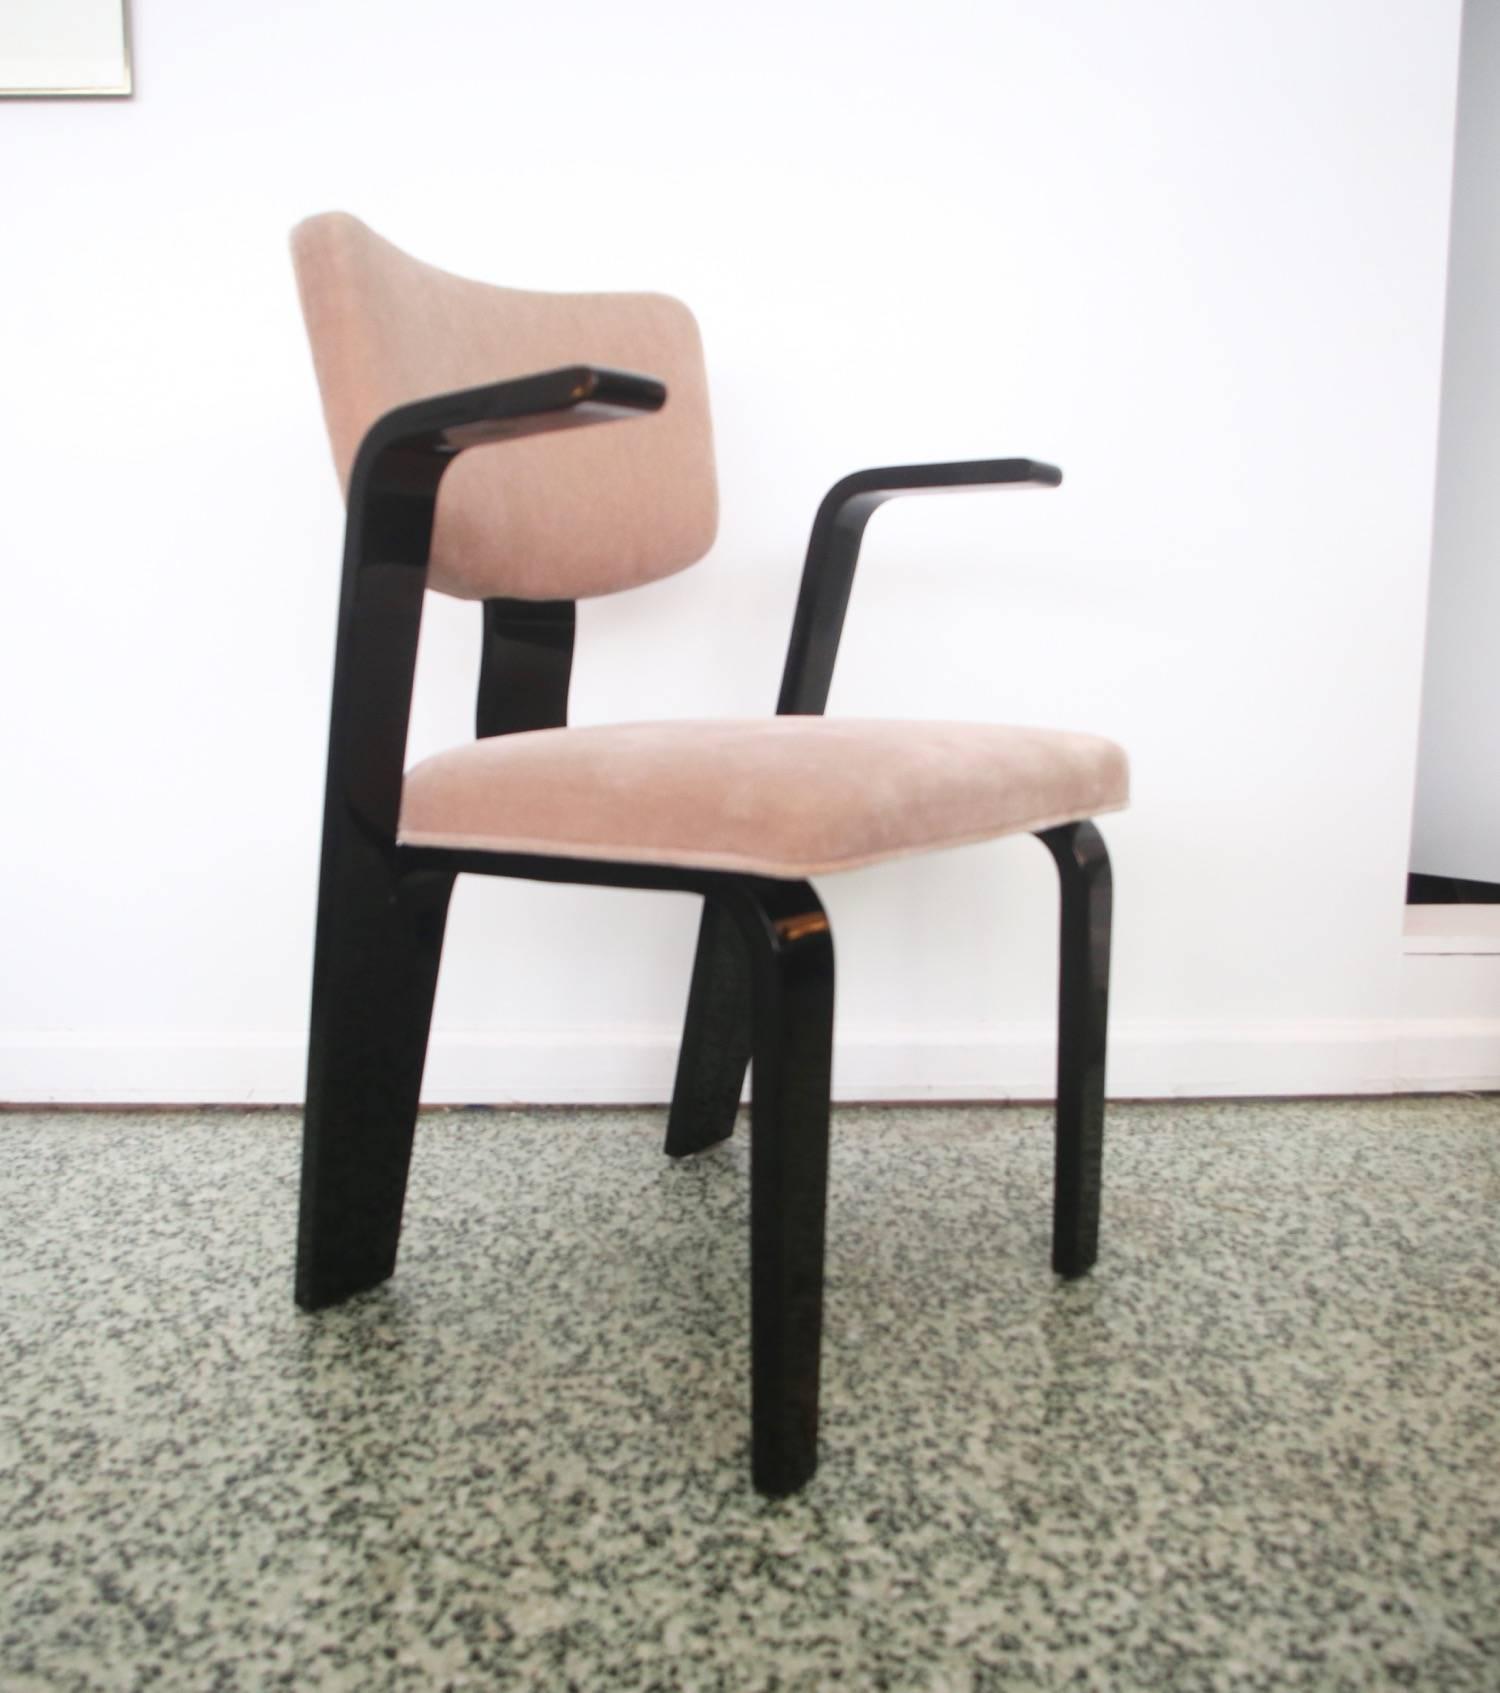 Designer: Unknown.
Manufacturer: Unknown.
Period/style: Mid-Century Modern.
Country: United States.
Date: 1960s.

In the style of: Thonet Aalto.